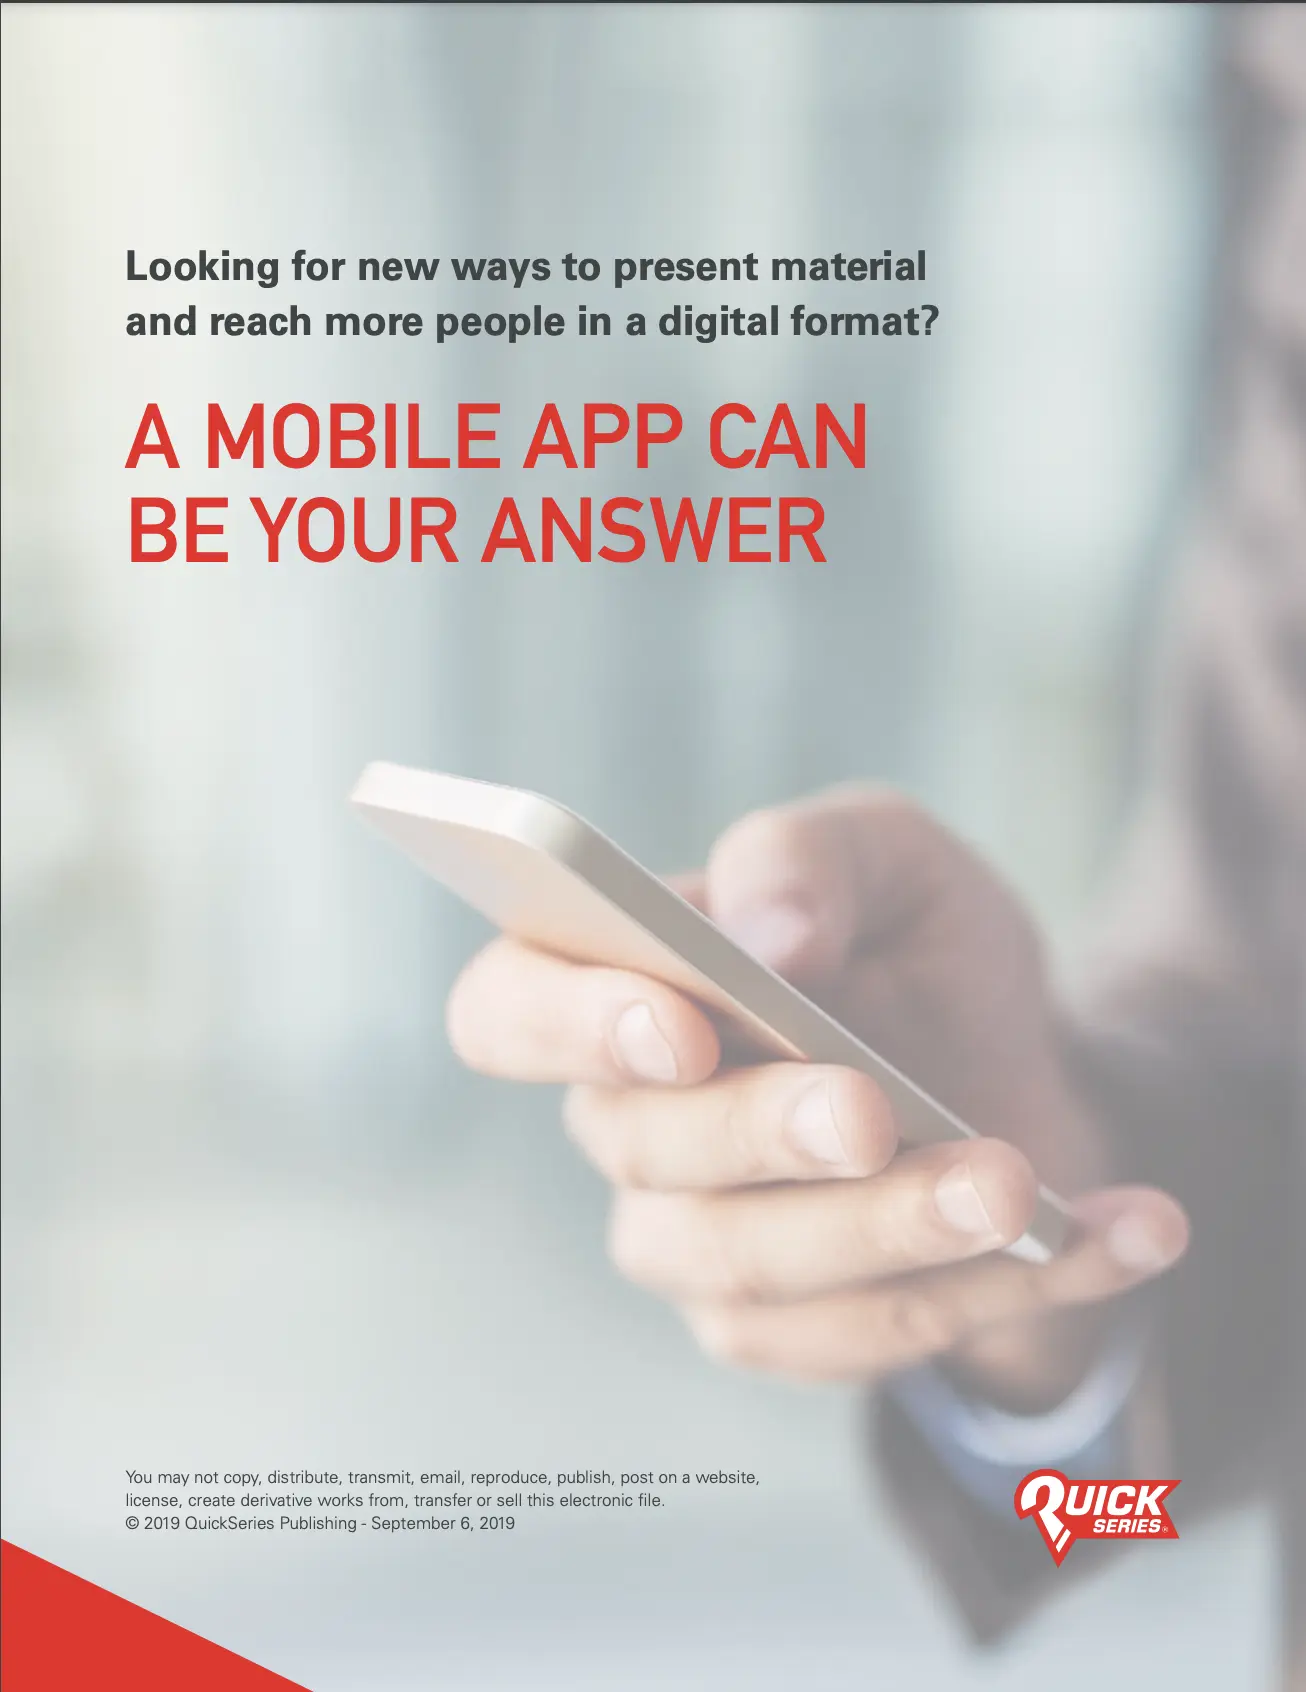 PDF cover image for A Mobile App Can Be Your Answer white paper